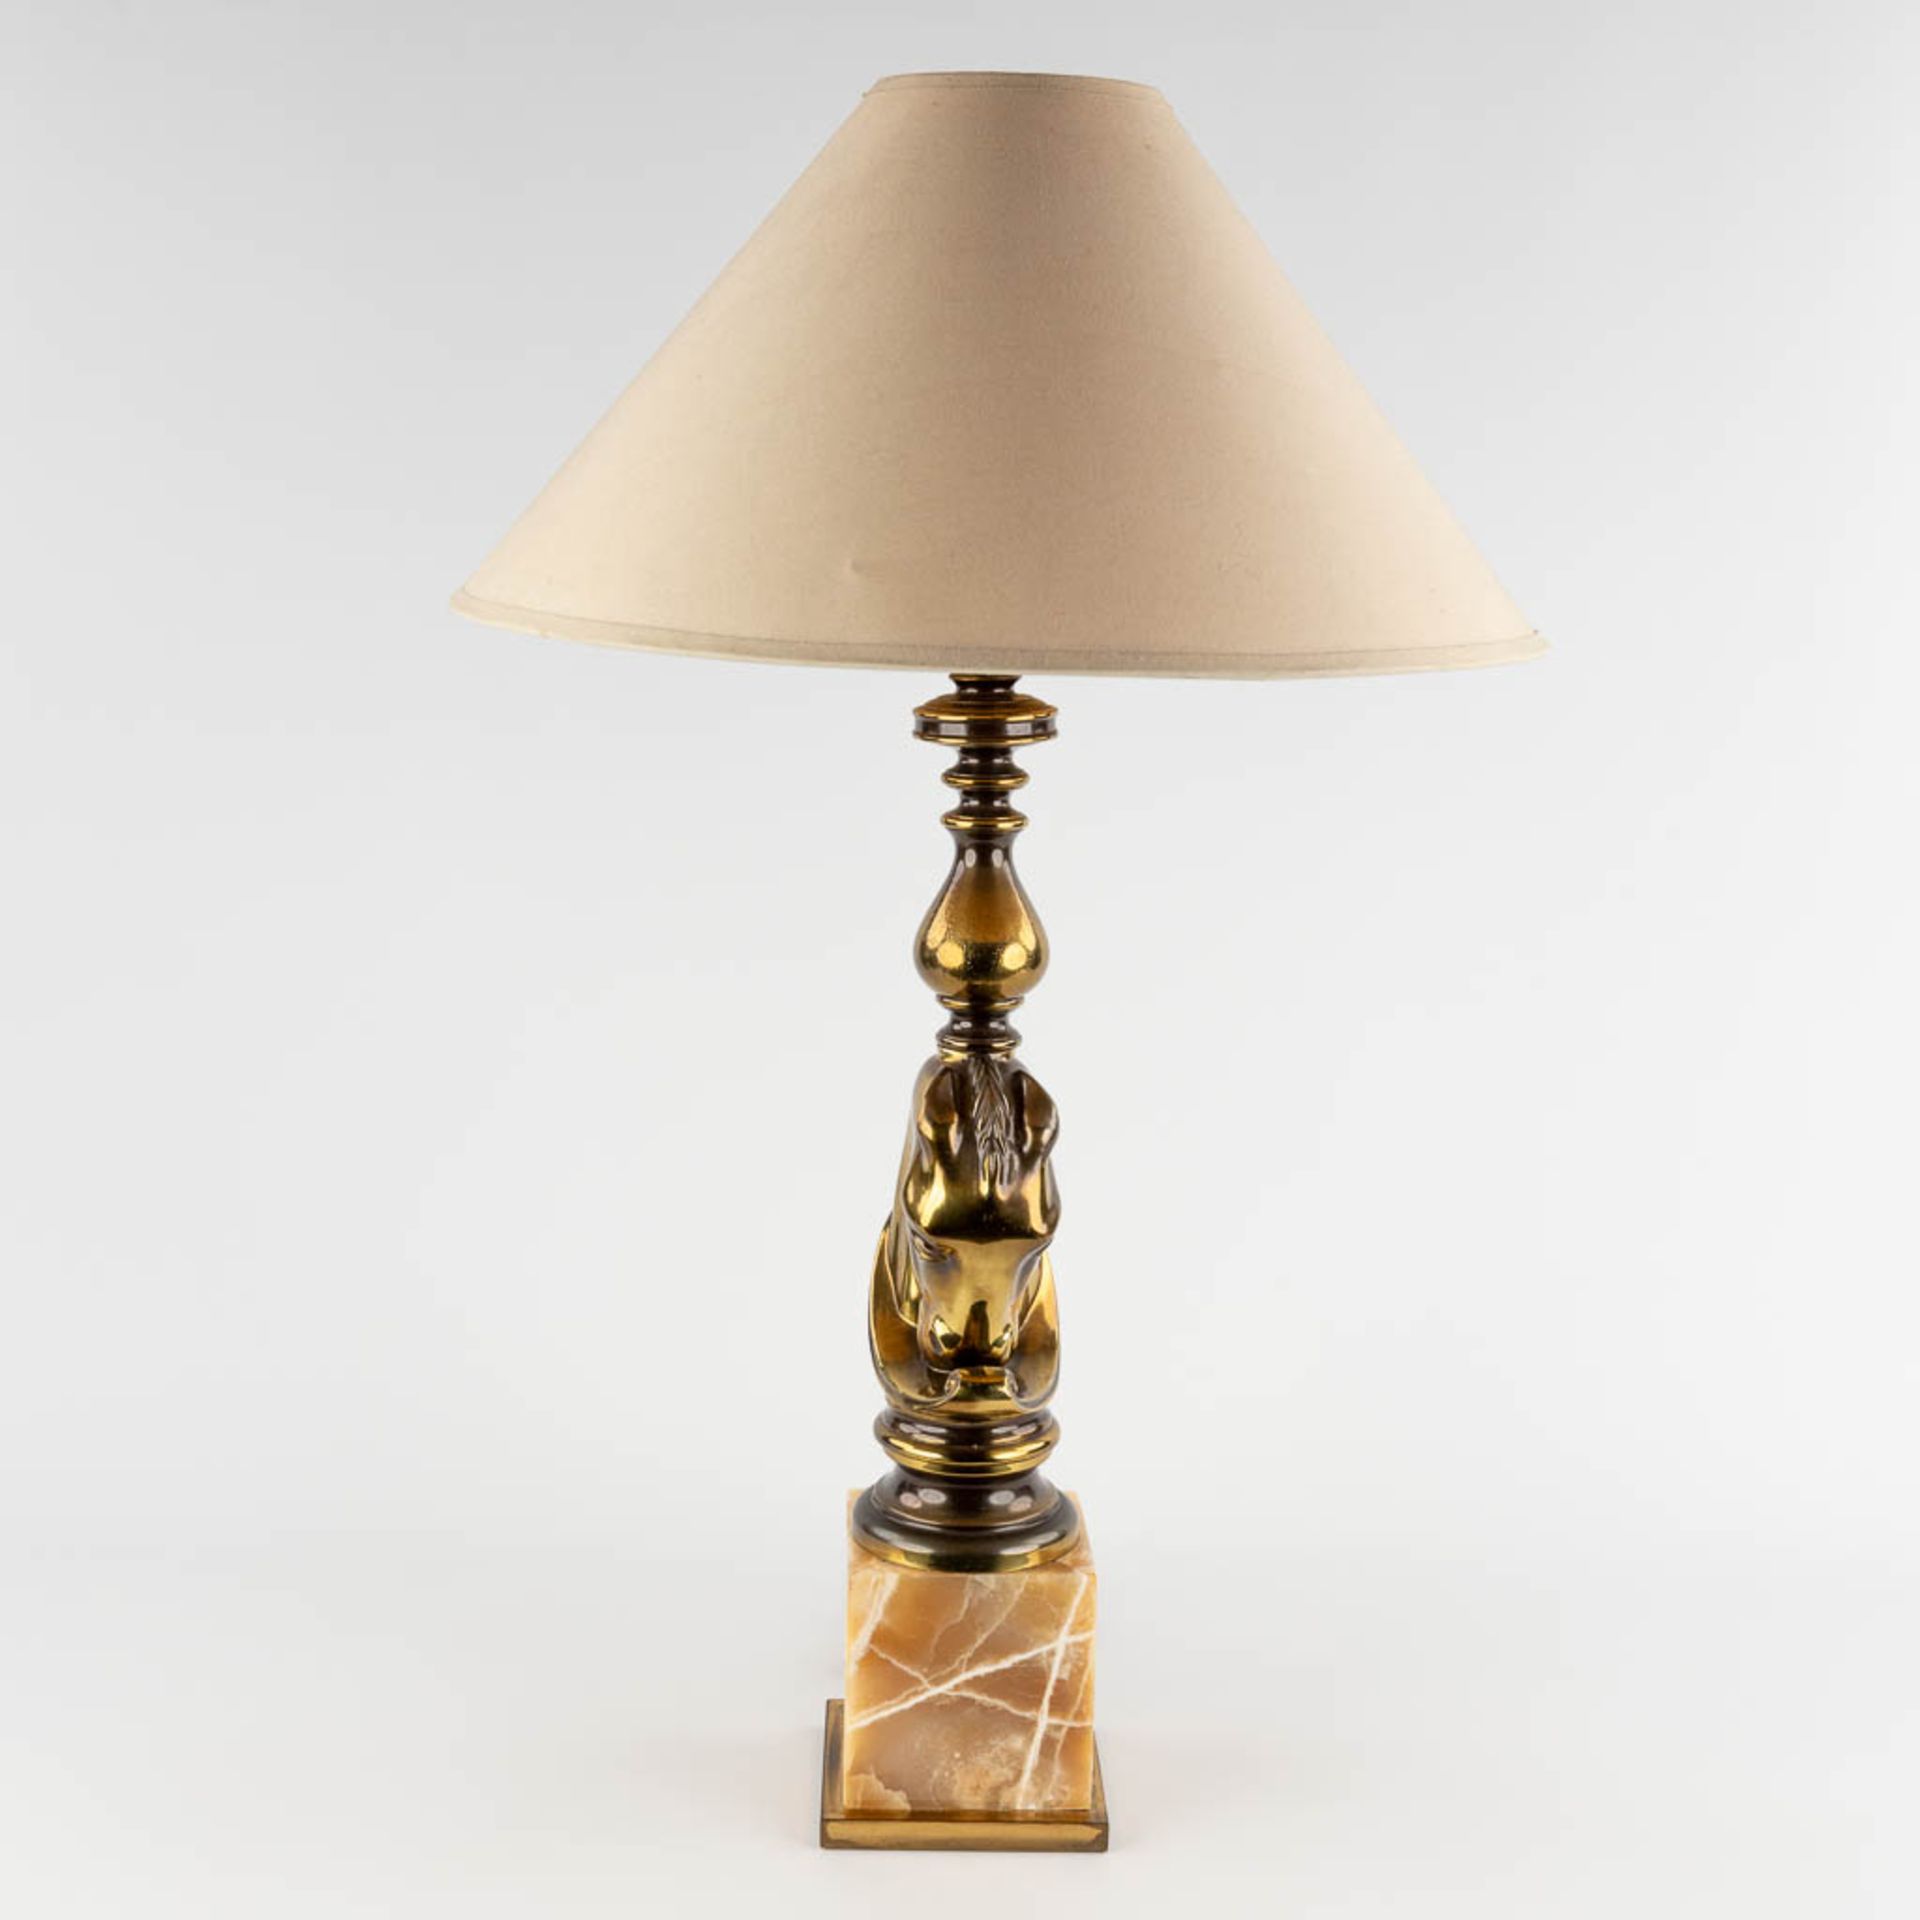 Deknudt, A table lamp with horse head, bronze on onyx. (D:14 x W:18 x H:60 cm) - Image 6 of 10